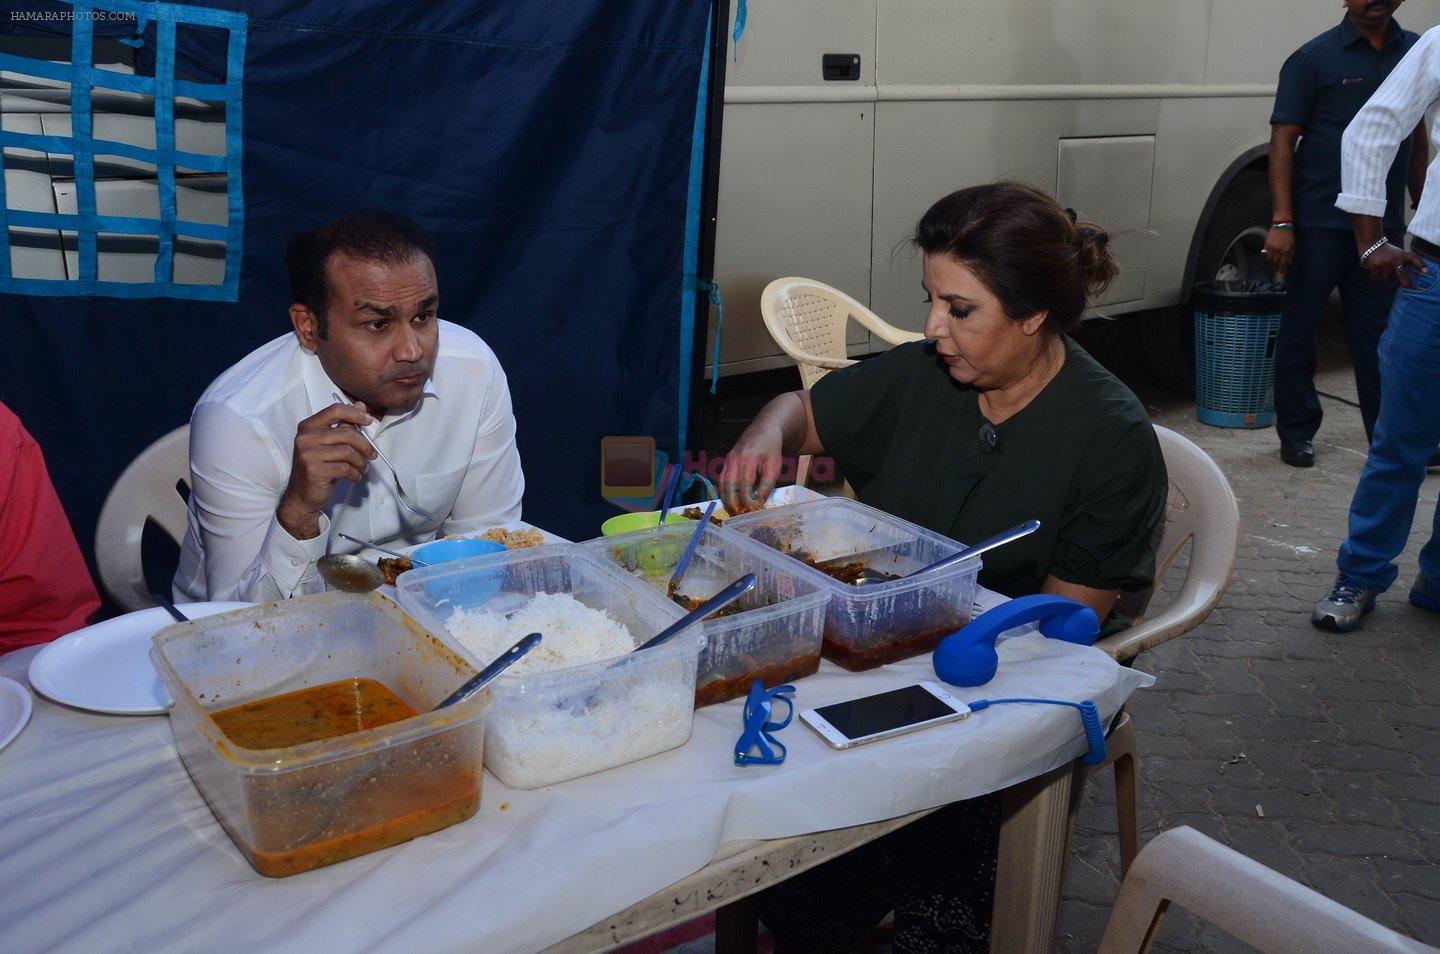 Virendra Sehwag and Farah Khan having lunch at Indian Idol sets